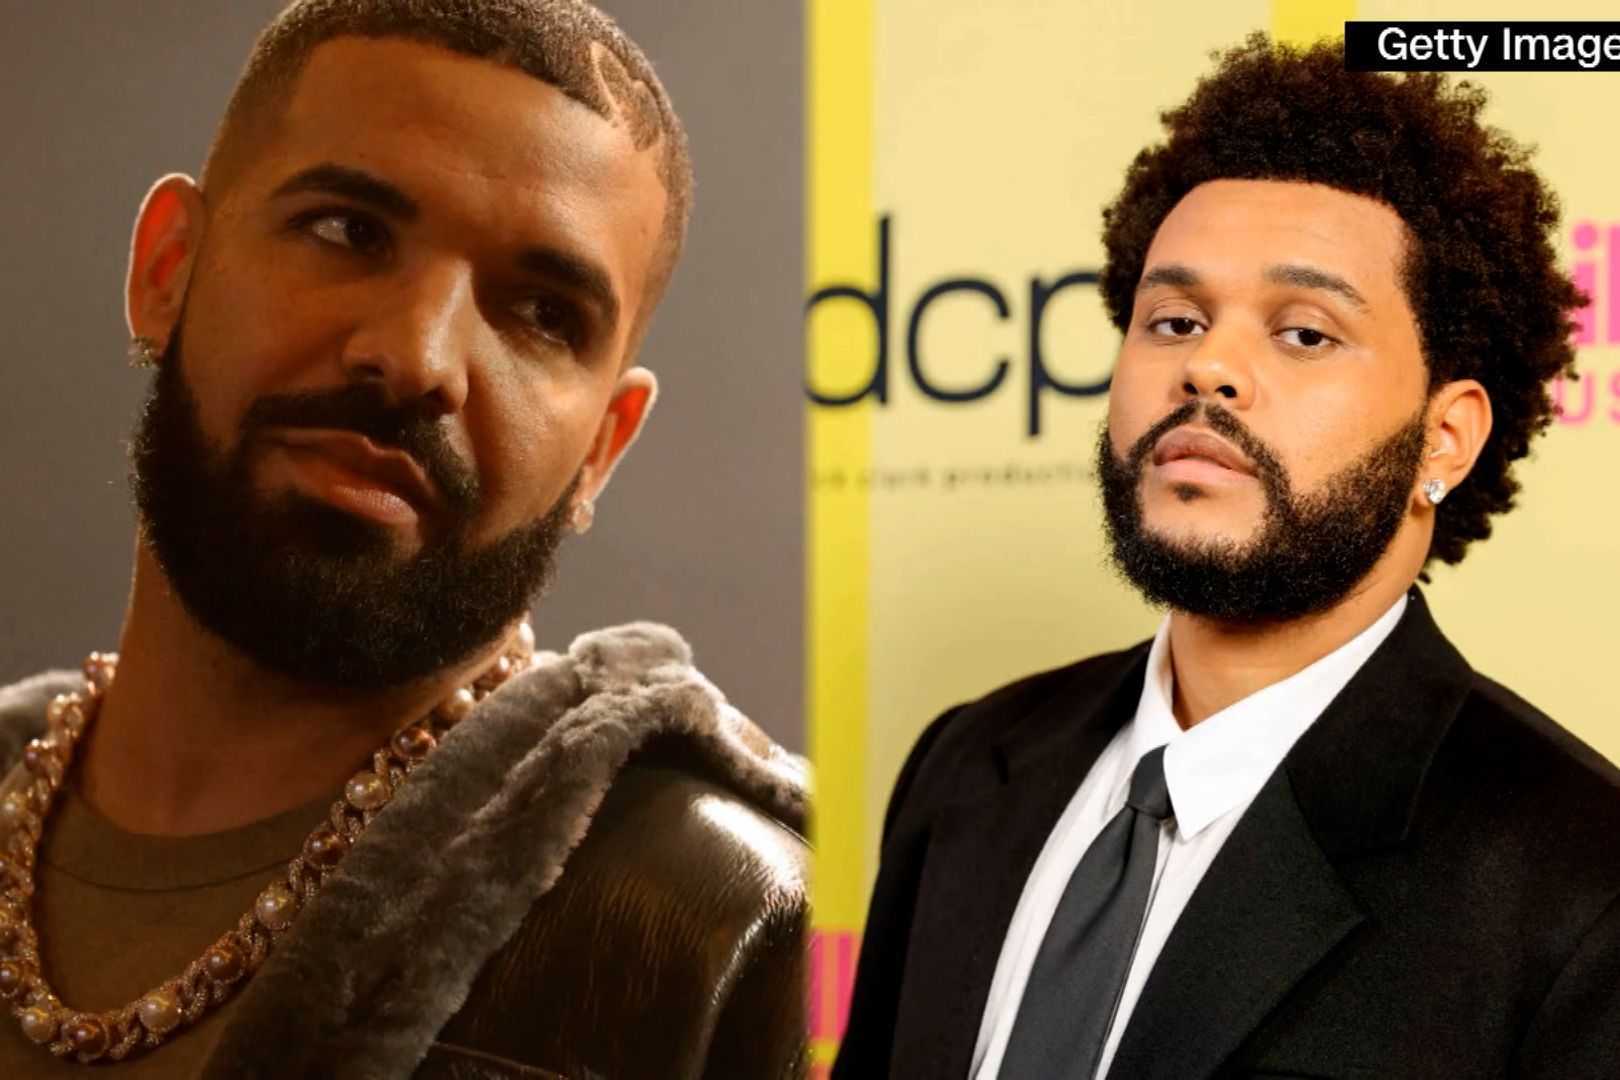 Video: Fake song featuring AI of Drake and The Weeknd goes viral. Here's  why that's a problem | CNN Business